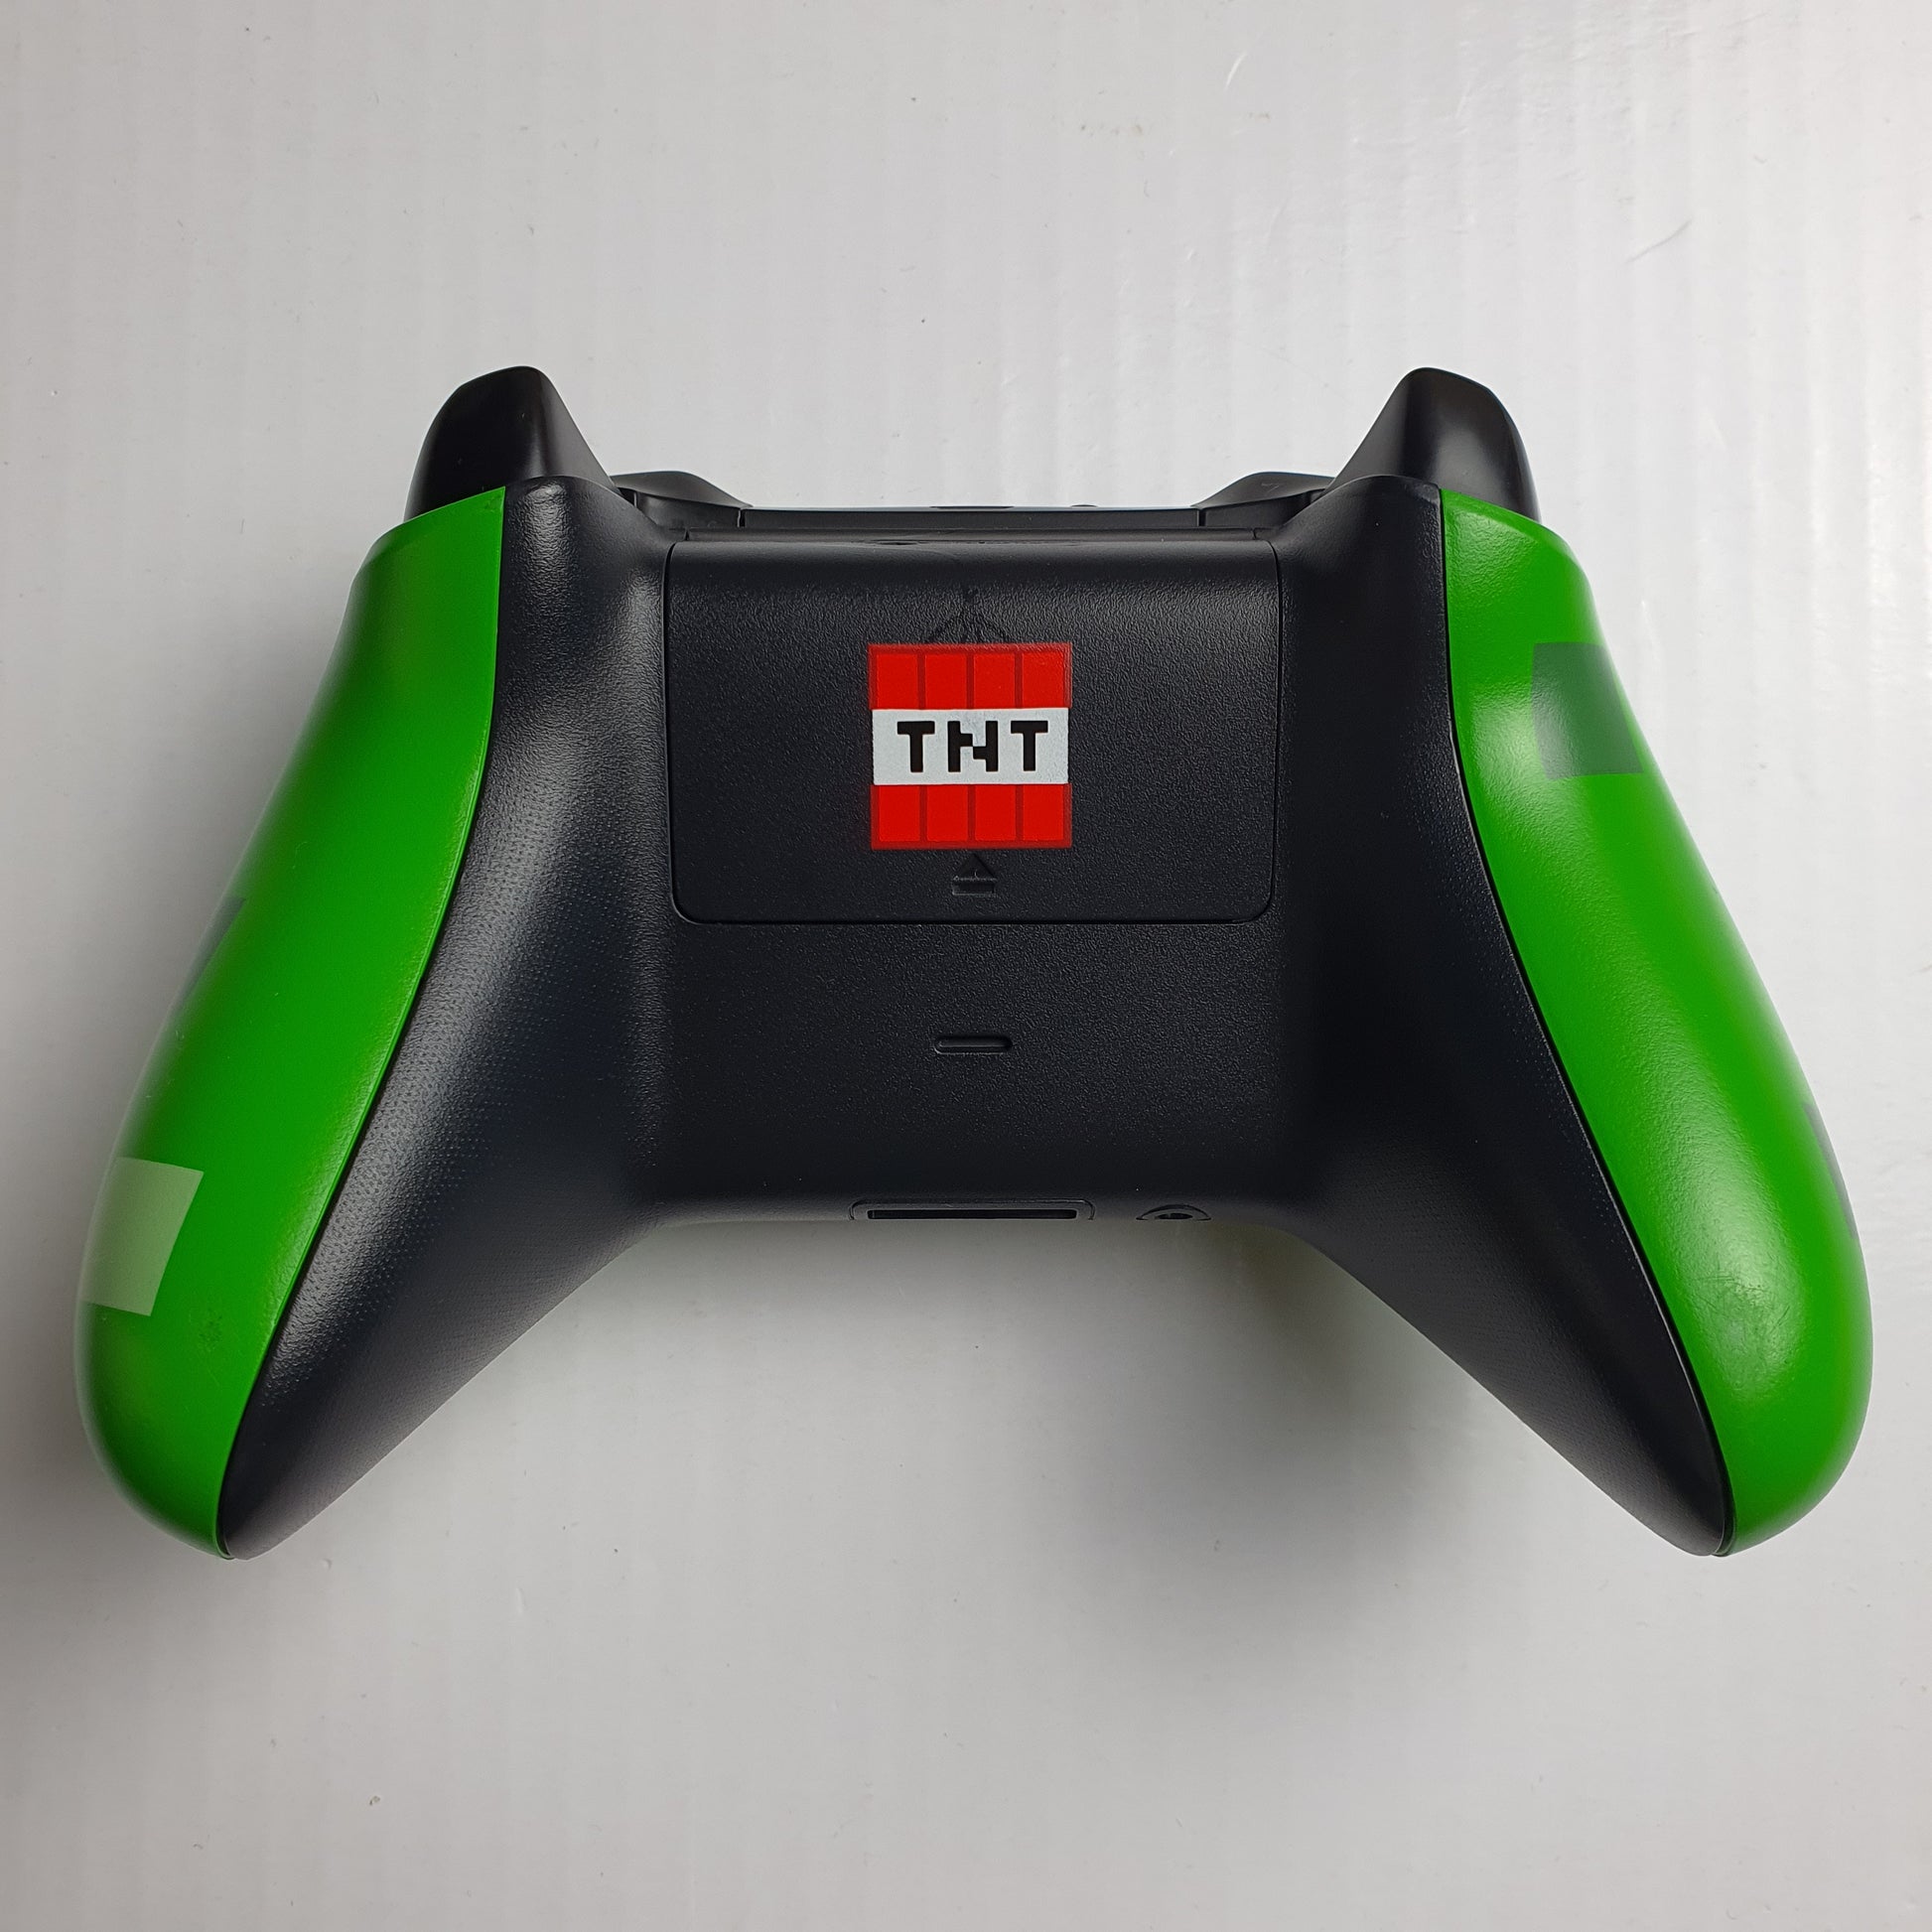 Brand New Minecraft Creeper Limited Edition Wireless Controller Xbox One  889842182347